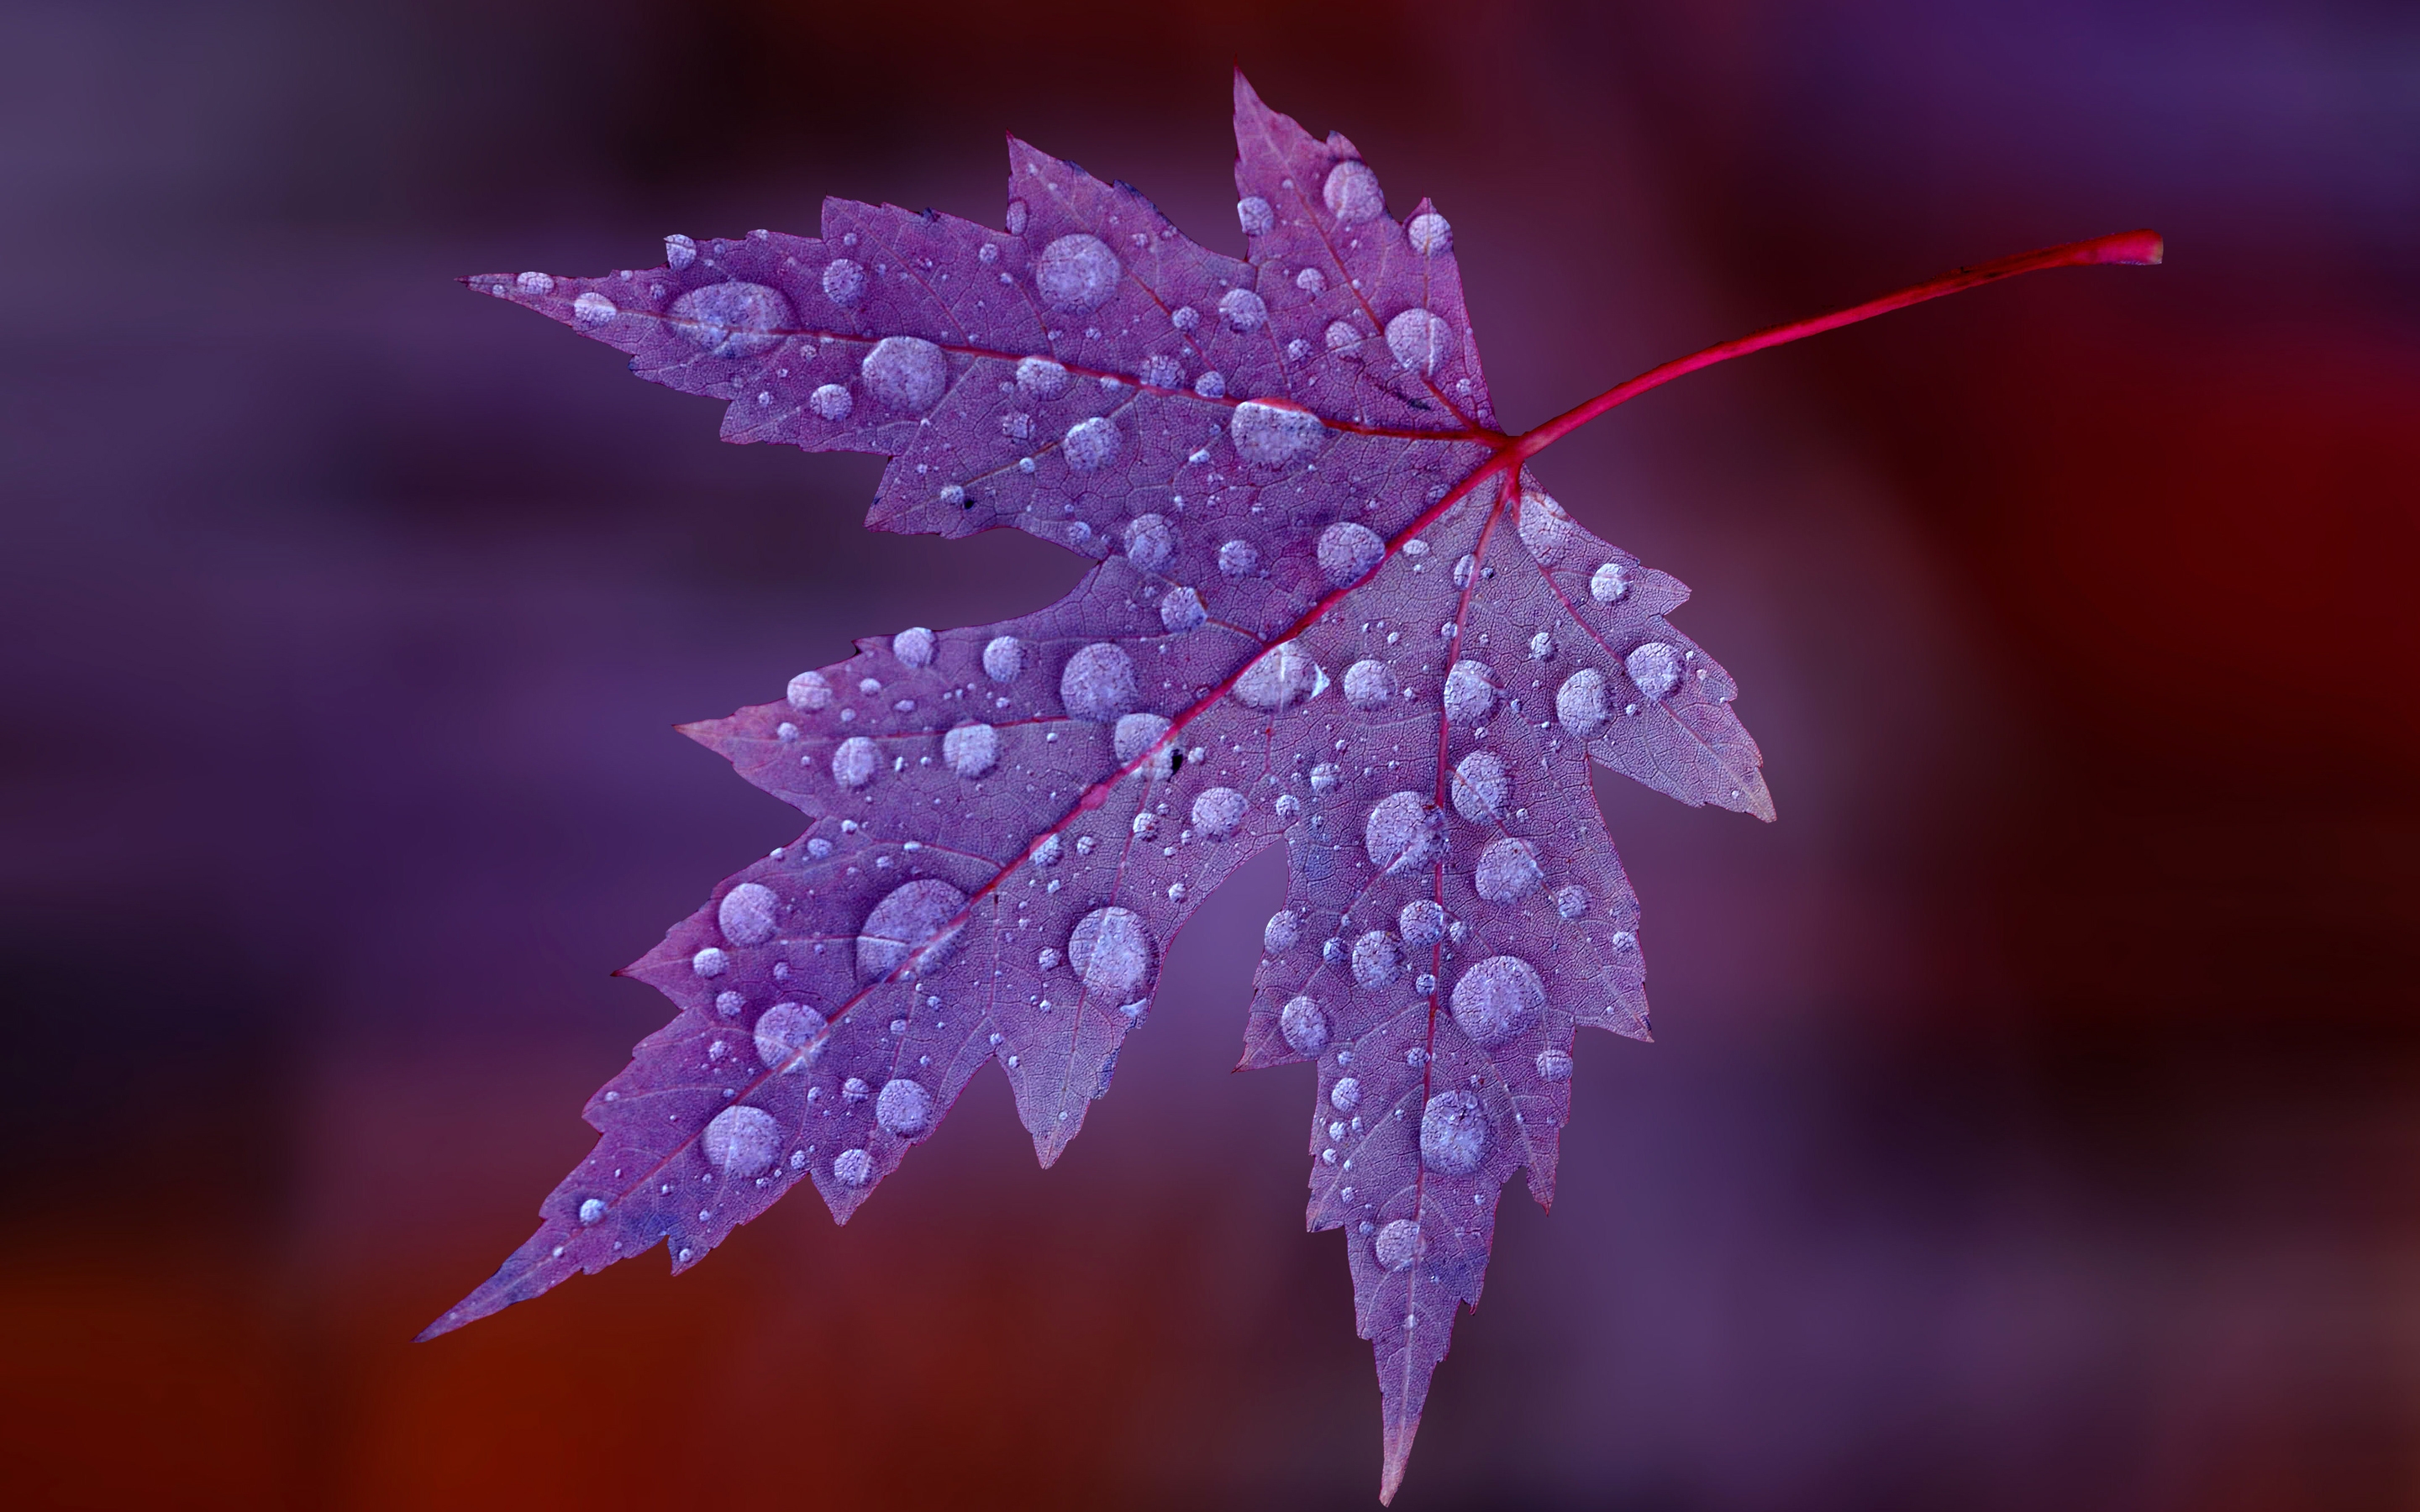 Water Drops on Purple Leaf wallpaper | nature and ...
